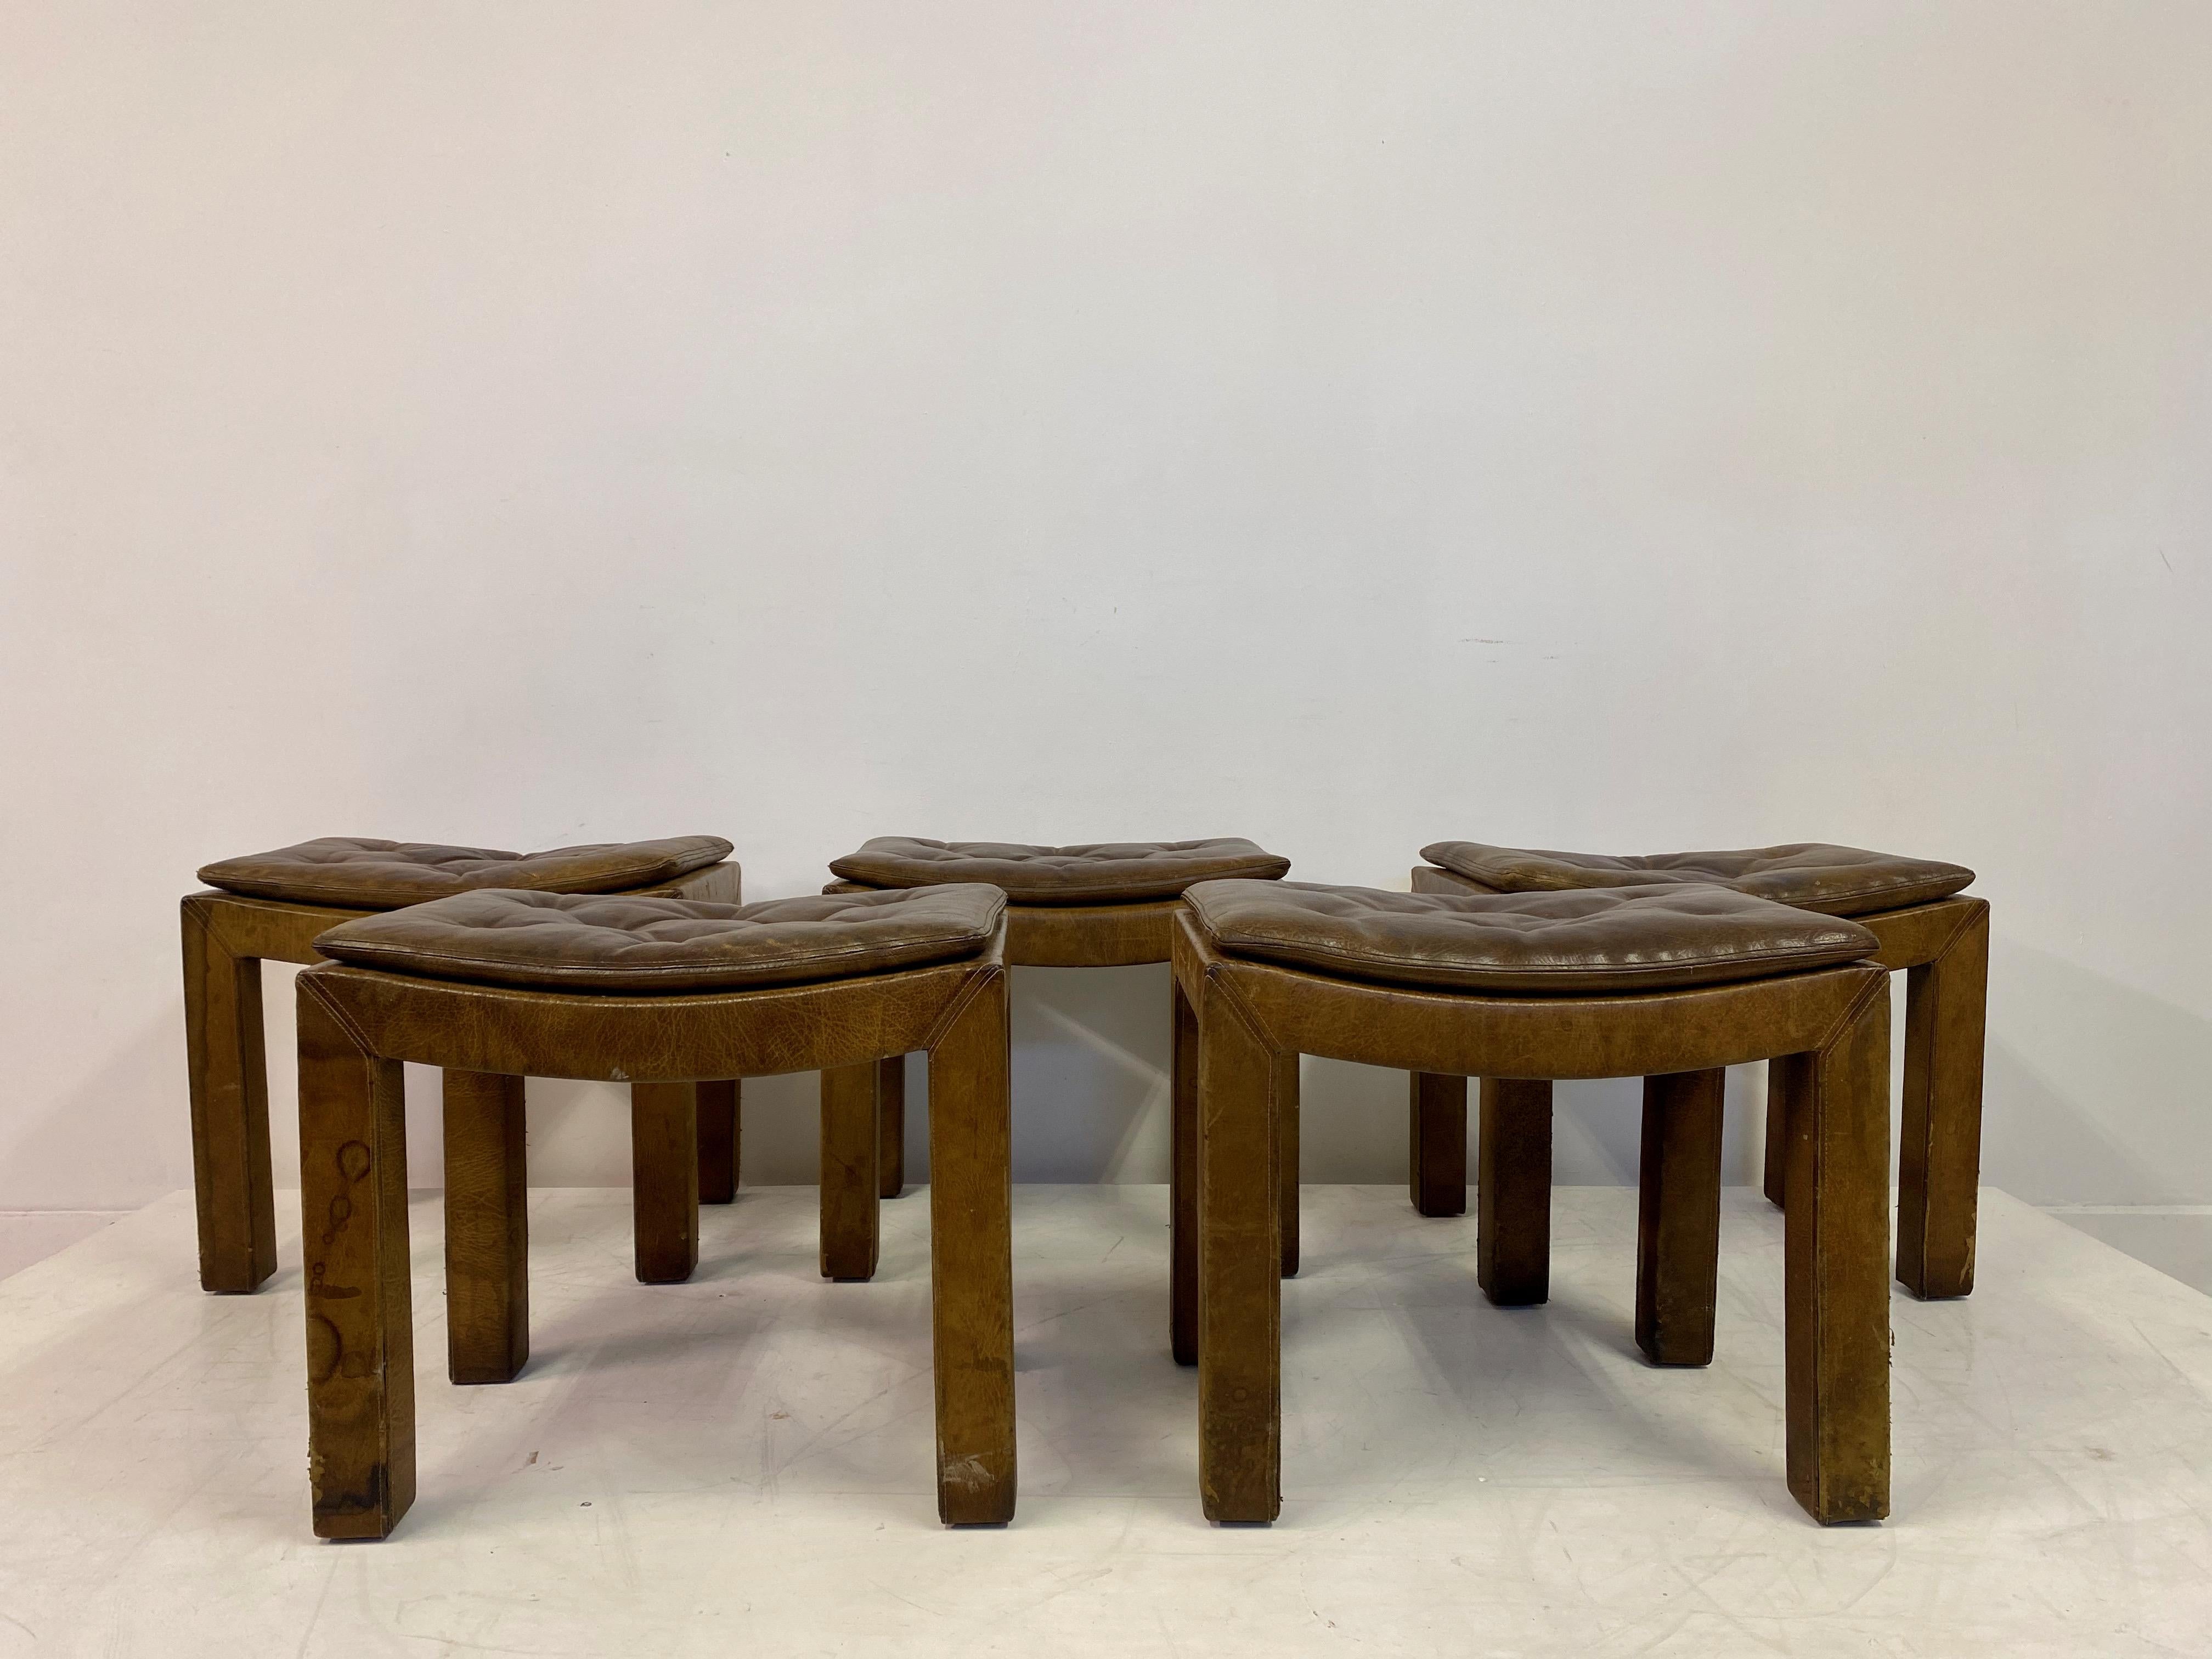 Set of five stools.

Buttoned leather seats.

Leather clad legs.

Mid to late 20th century.